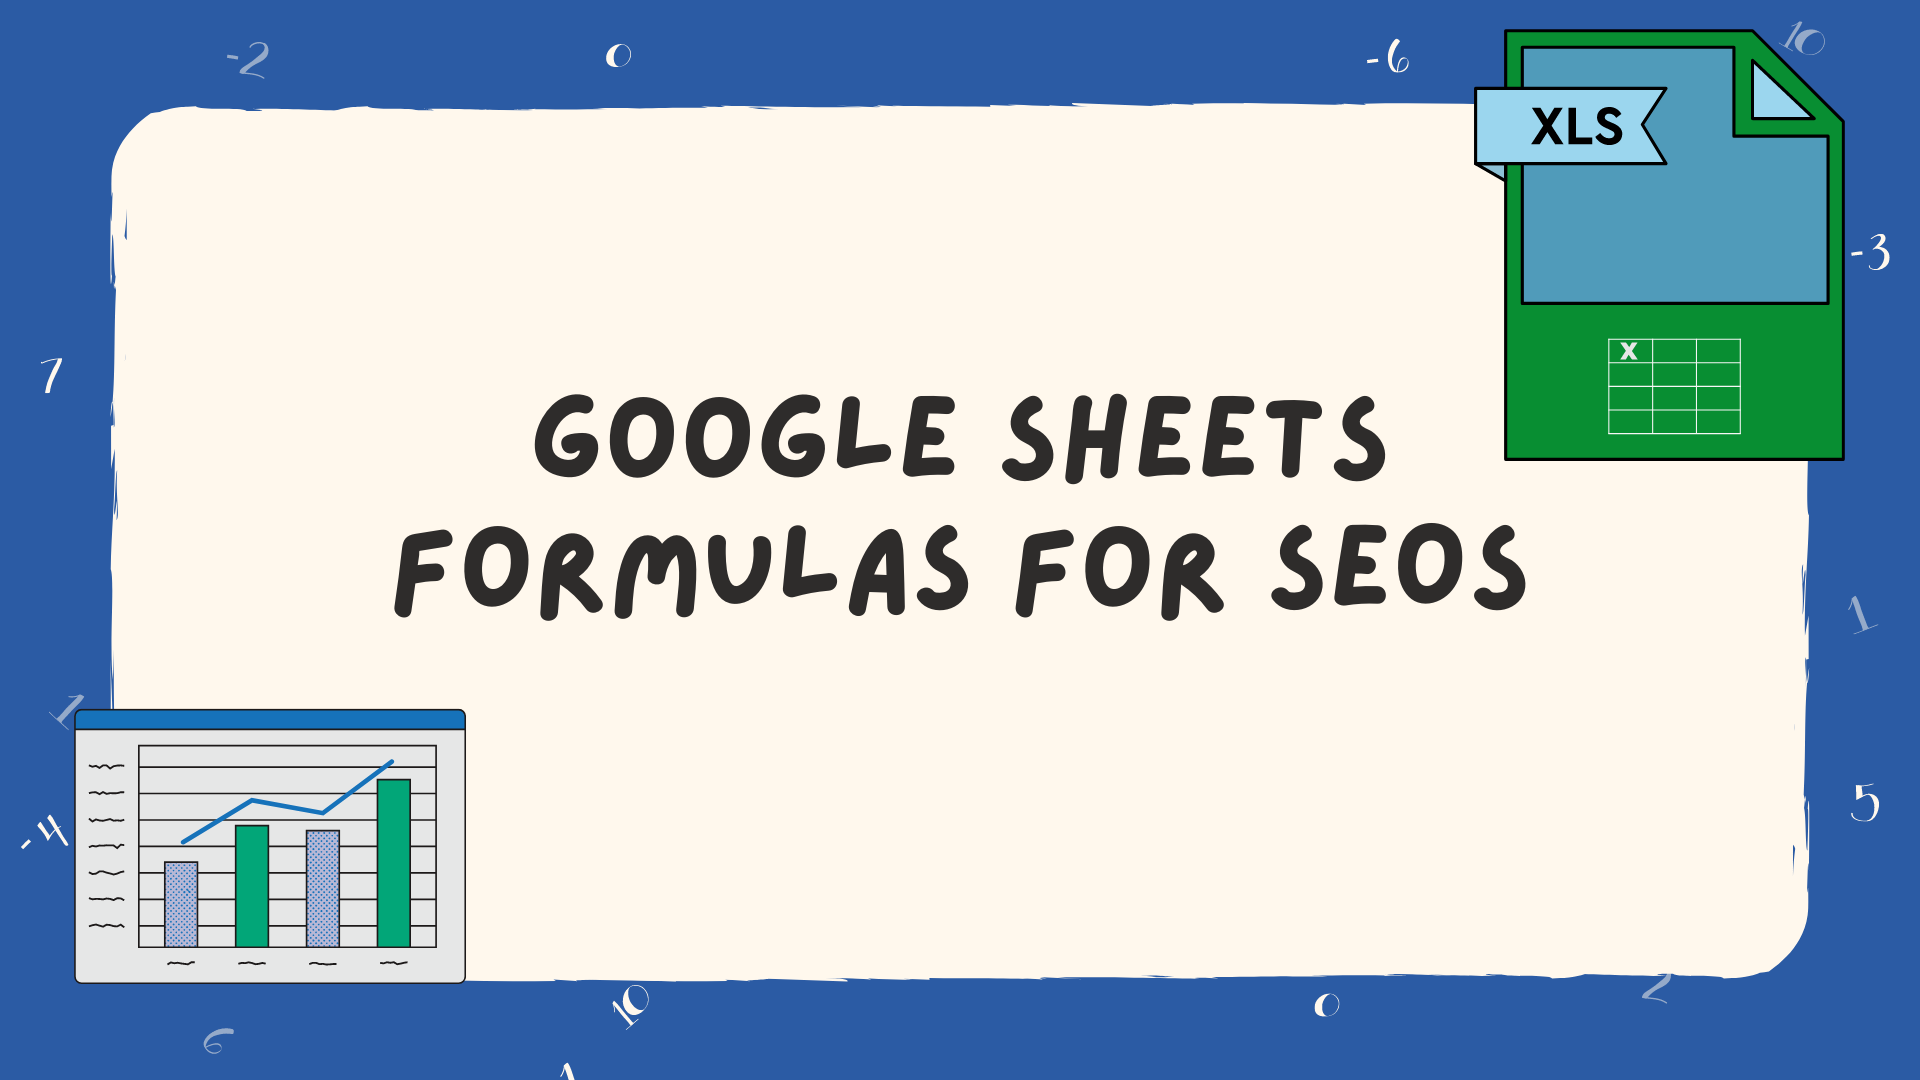 12 Google Sheets Formulas for SEO Keyword Research & Content Analysis